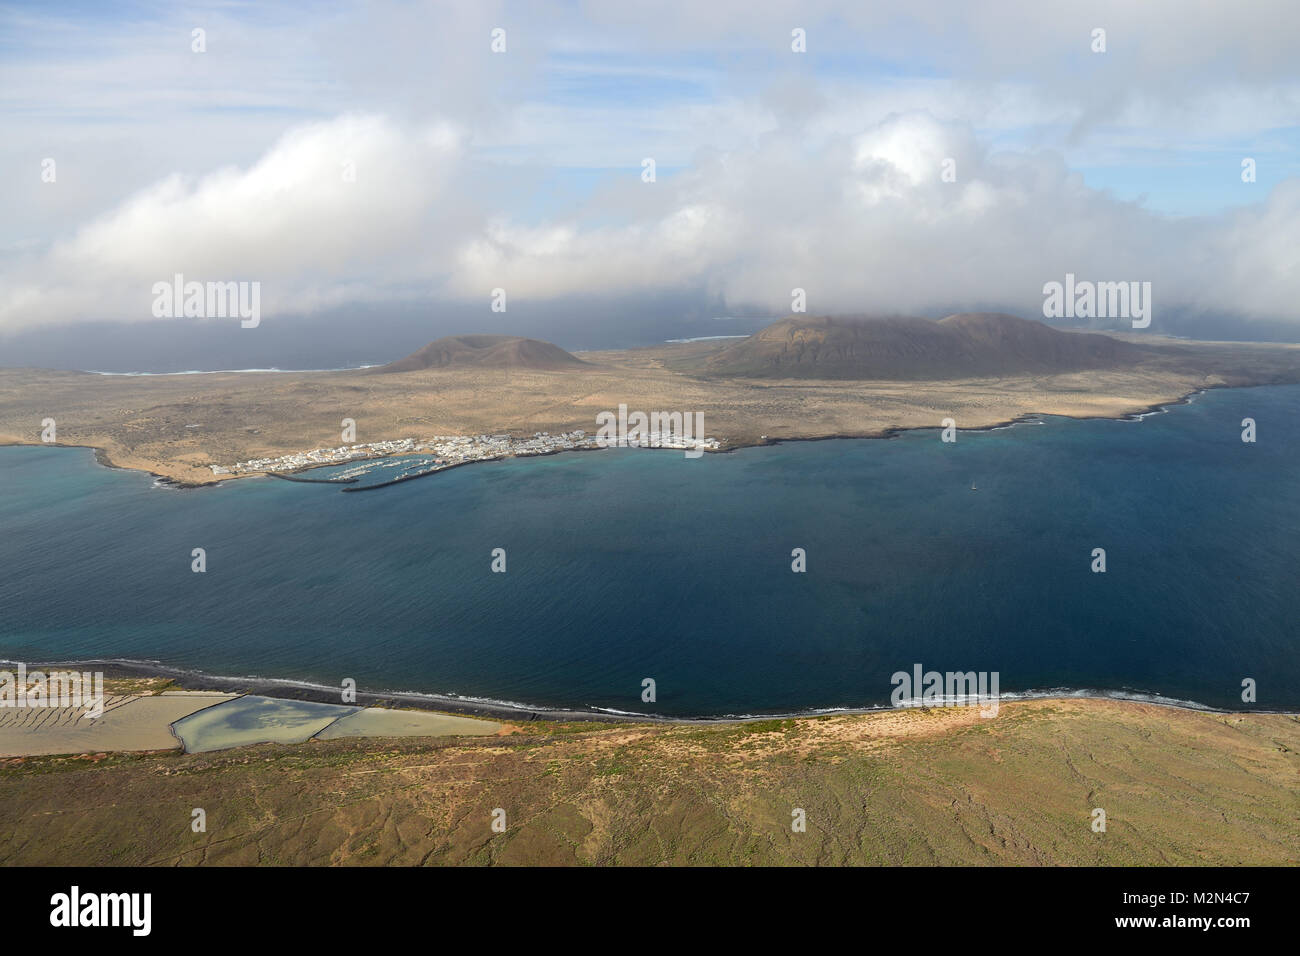 La Graciosa island is a volcanic island in the Canary Islands of Spain just north of Lanzarote. It is part of the Chinijo Archipelago Natural Park. Stock Photo